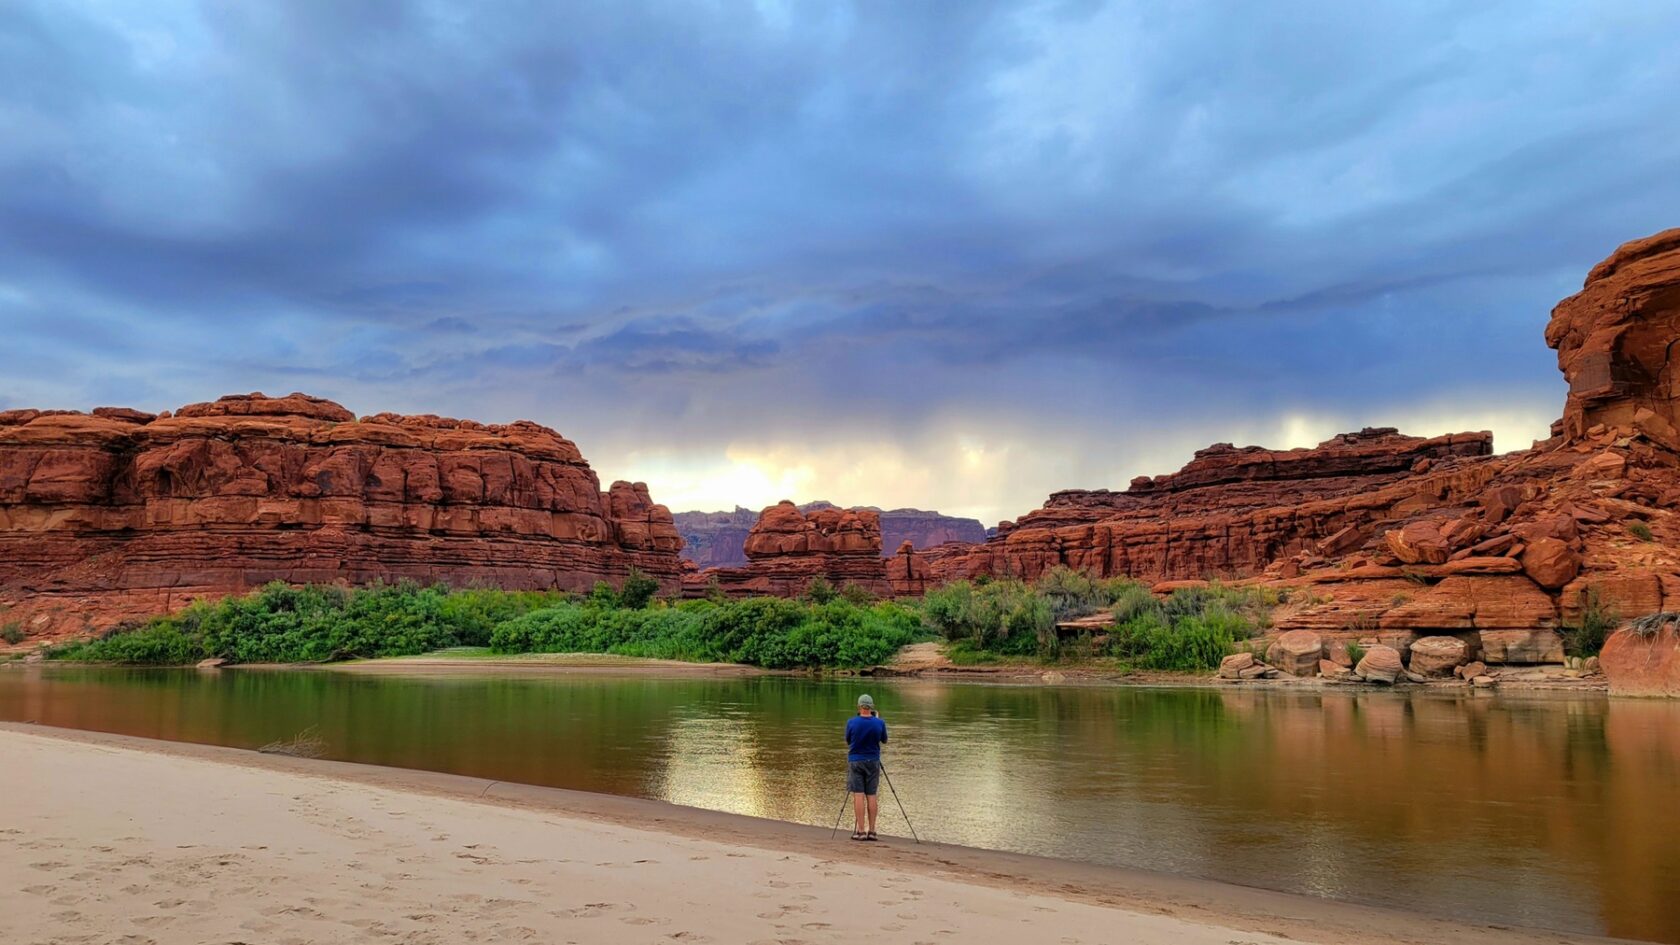 A person captures a stormy sunset unfolding along the Colorado River in Canyonlands National Park